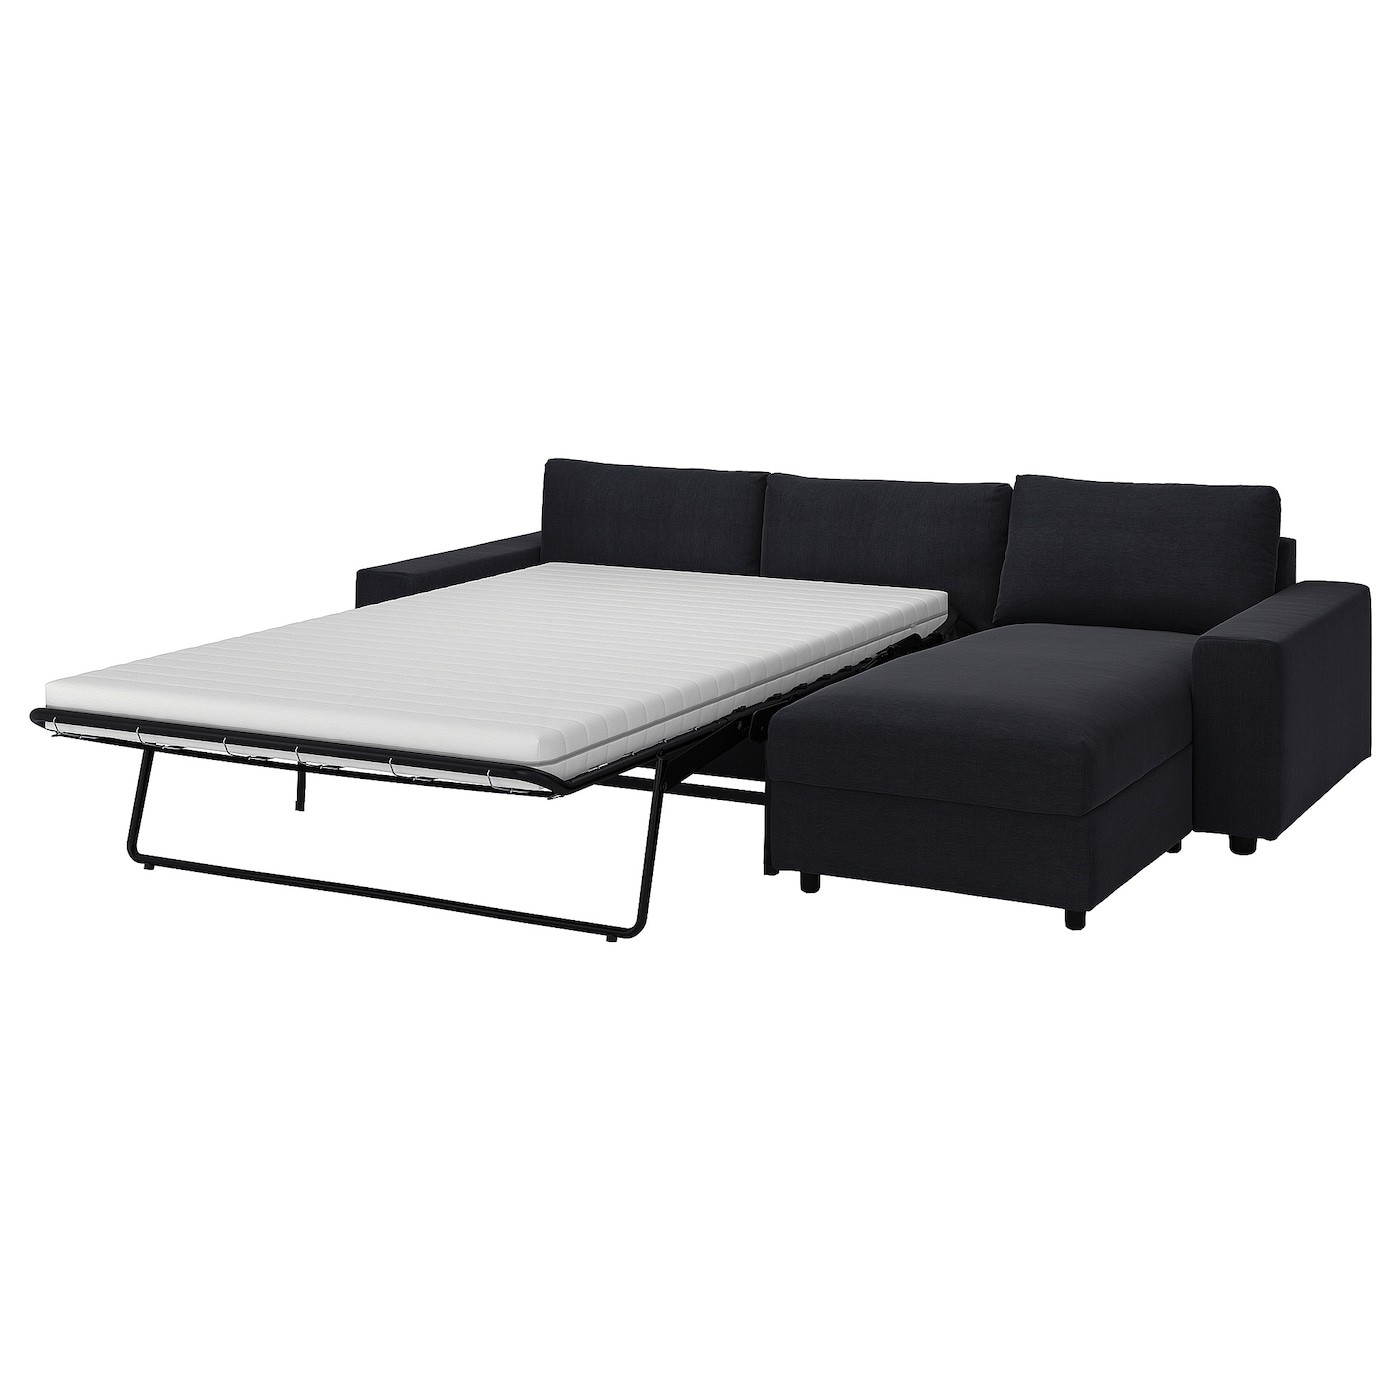 VIMLE 3-seat sofa-bed with chaise longue